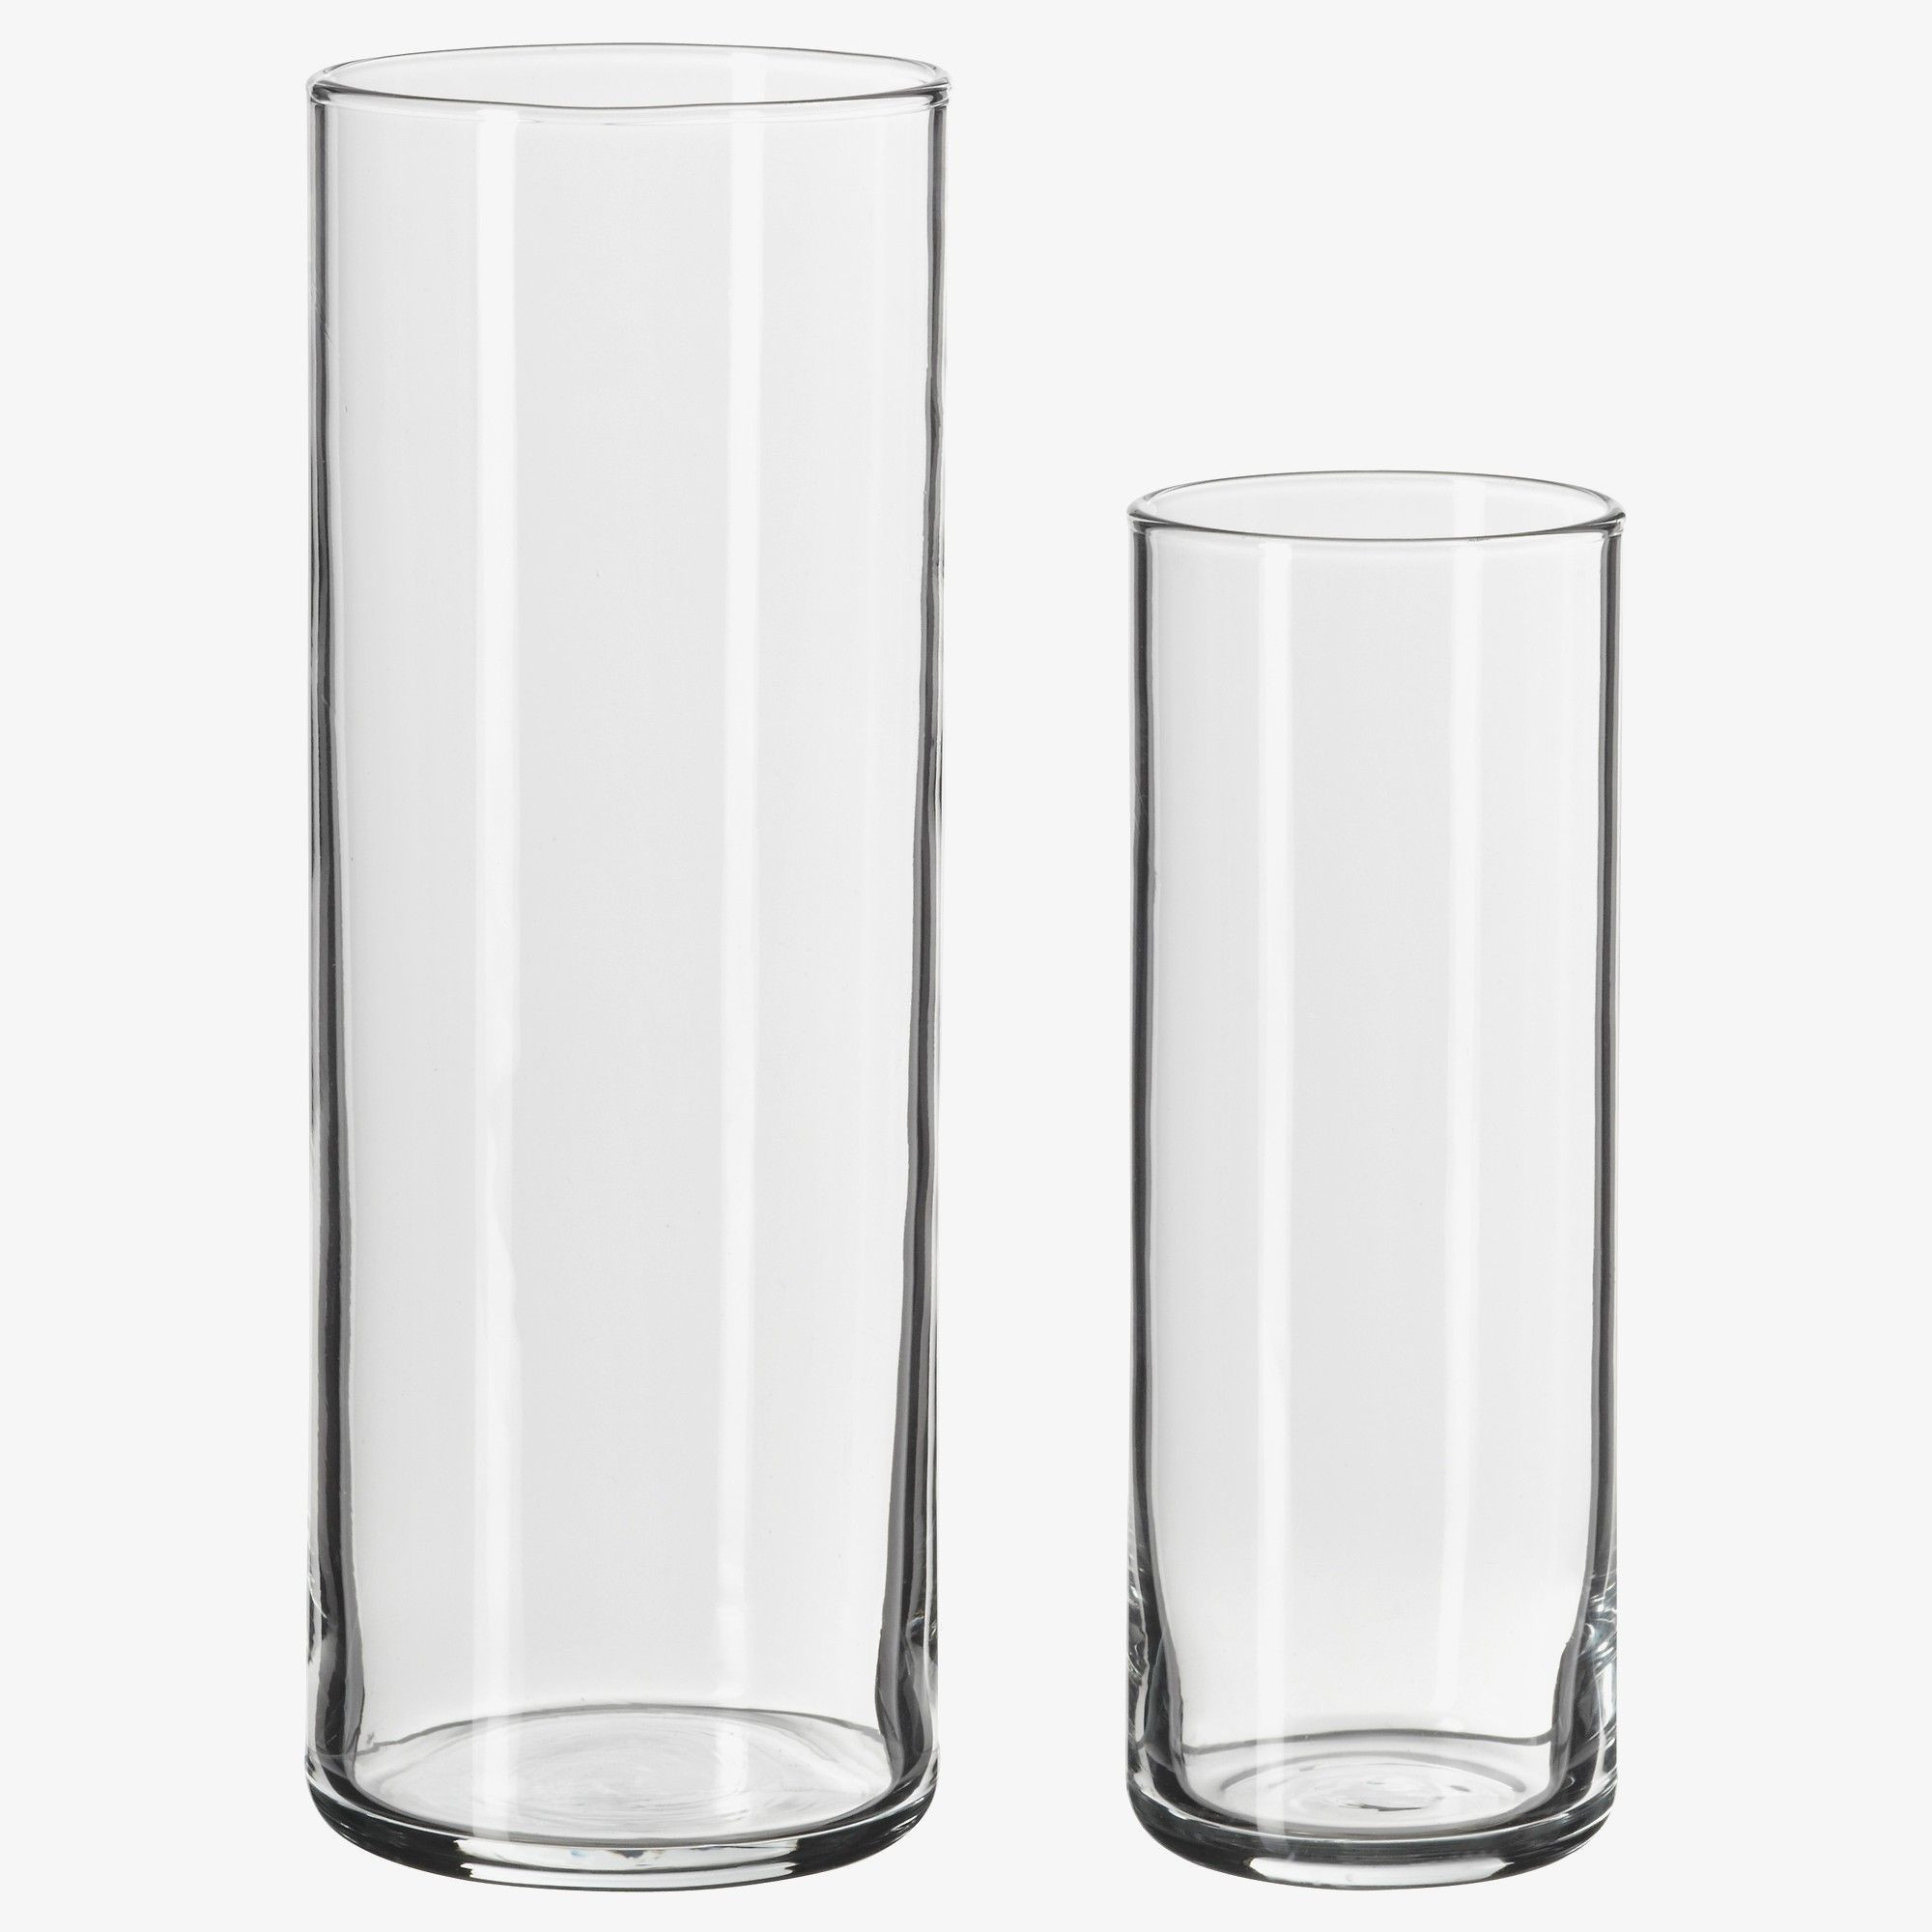 22 Perfect Tall Glass Cylinder Vases wholesale 2024 free download tall glass cylinder vases wholesale of 40 glass vases bulk the weekly world in clear glass tv stand charming new design ikea mantel great pe s5h